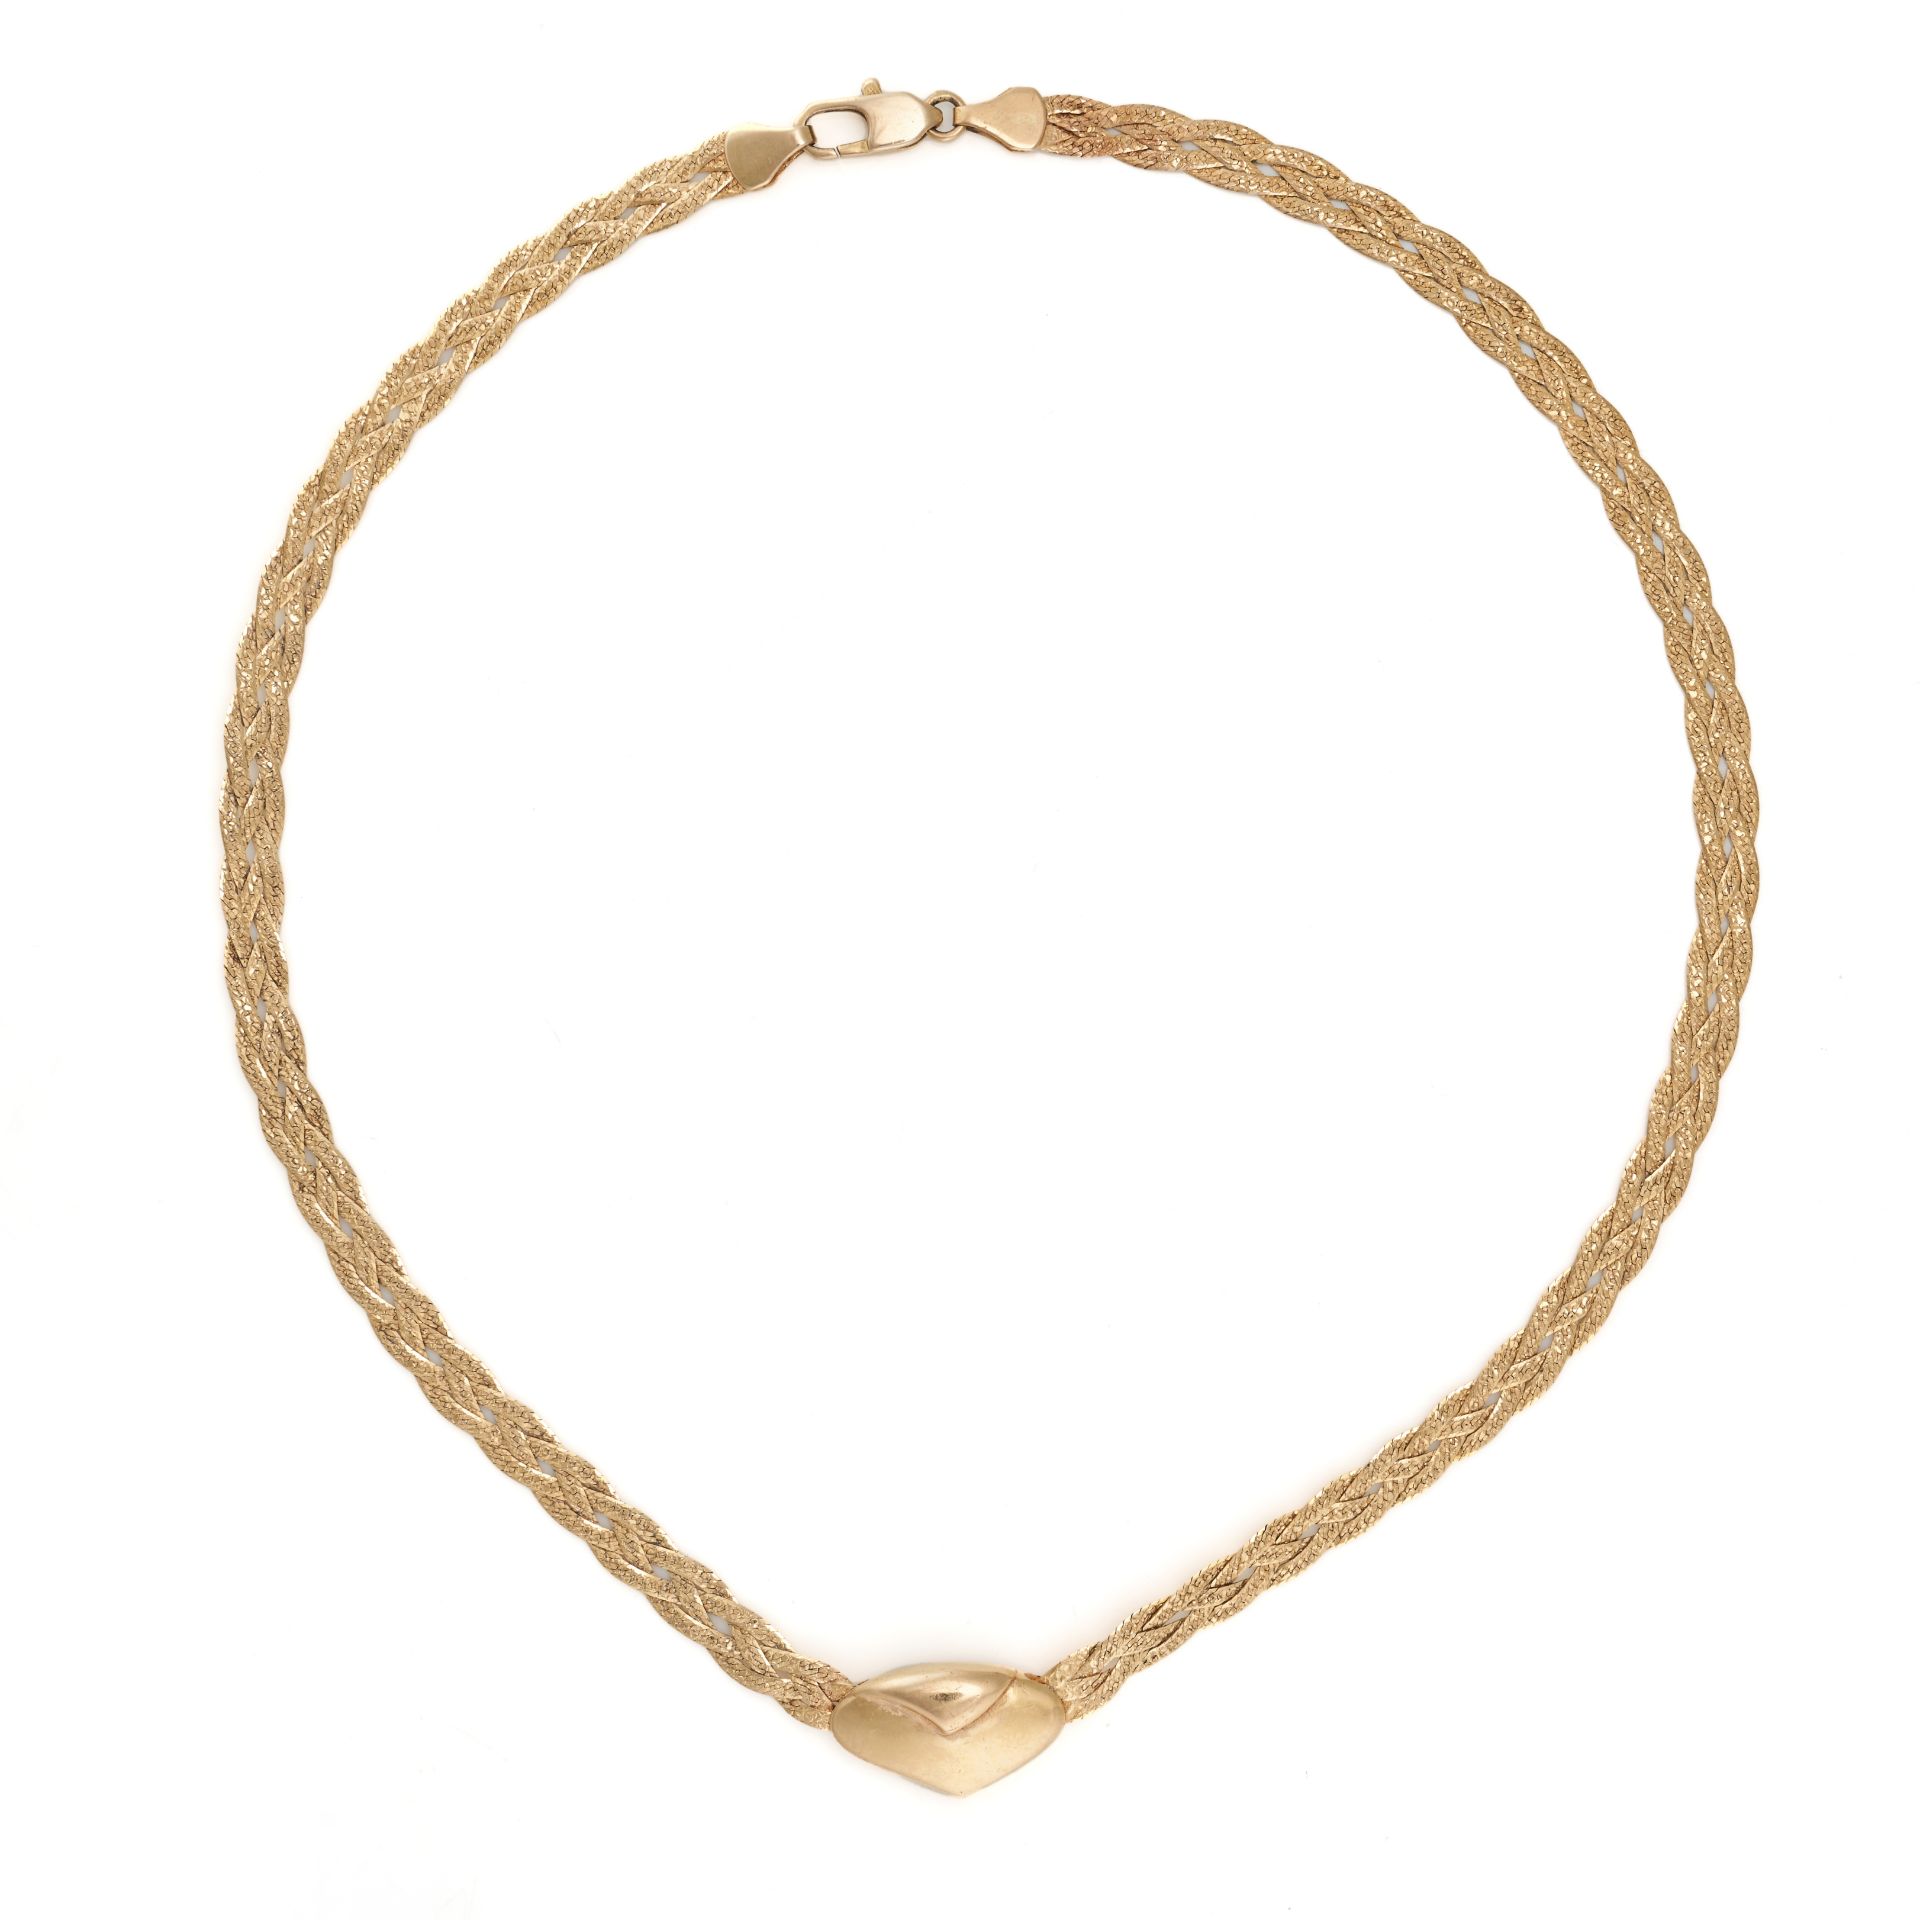 A GOLD PENDANT NECKLACE in 14ct yellow gold, clasp stamped 14K, 41.0cm, 12.2g.